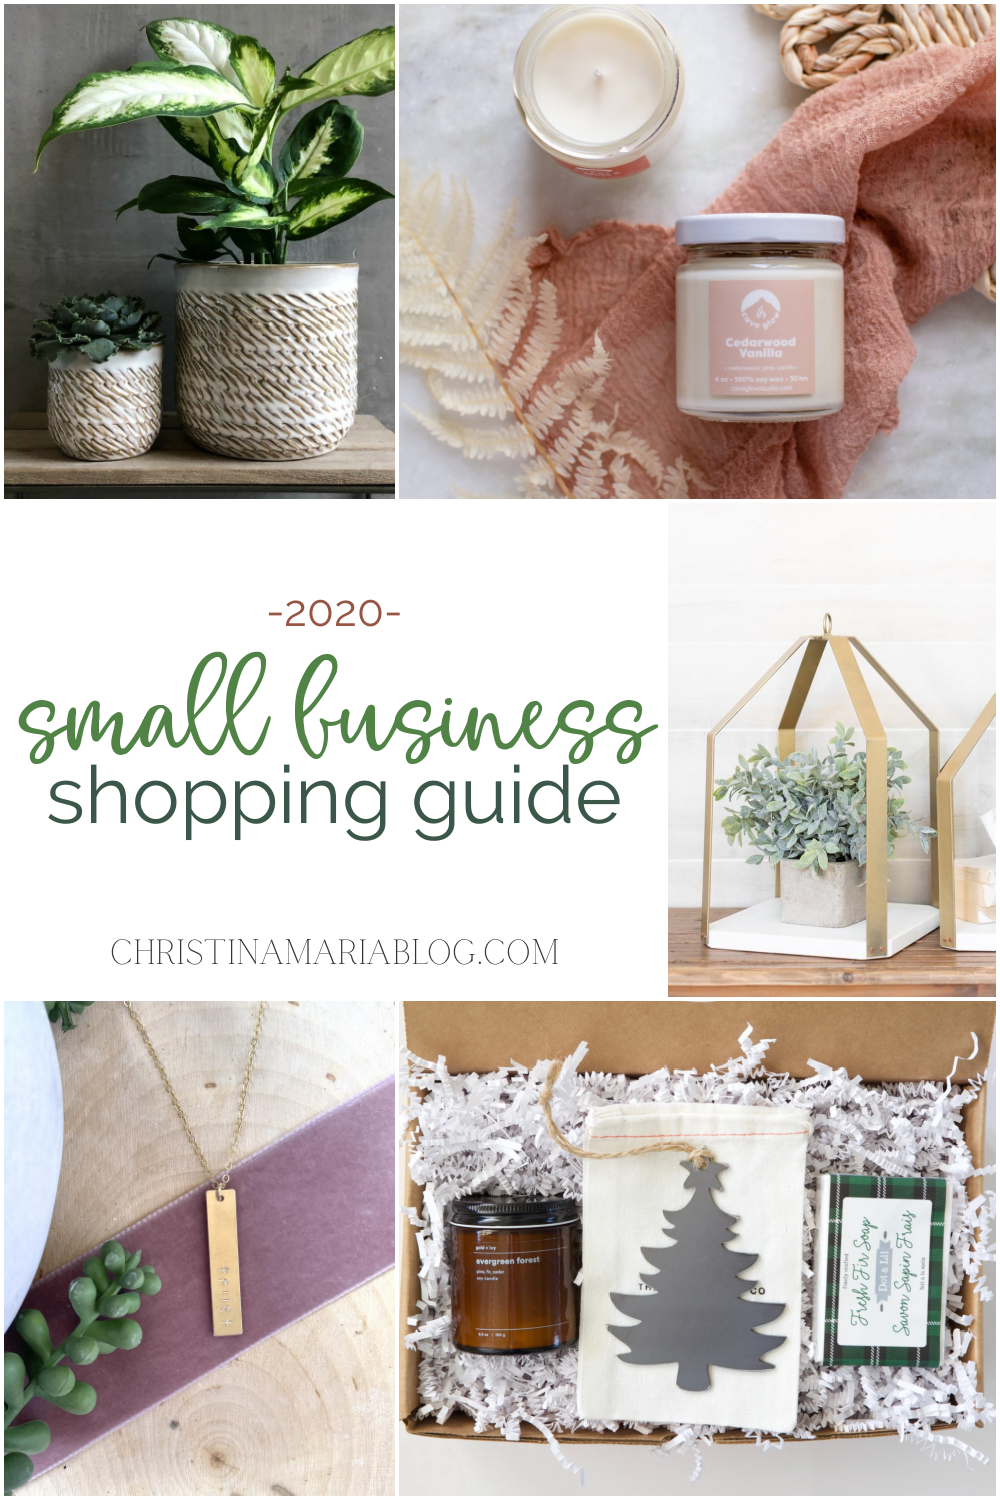 https://christinamariablog.com/wp-content/uploads/2020/11/2020-small-business-shopping-guide.png